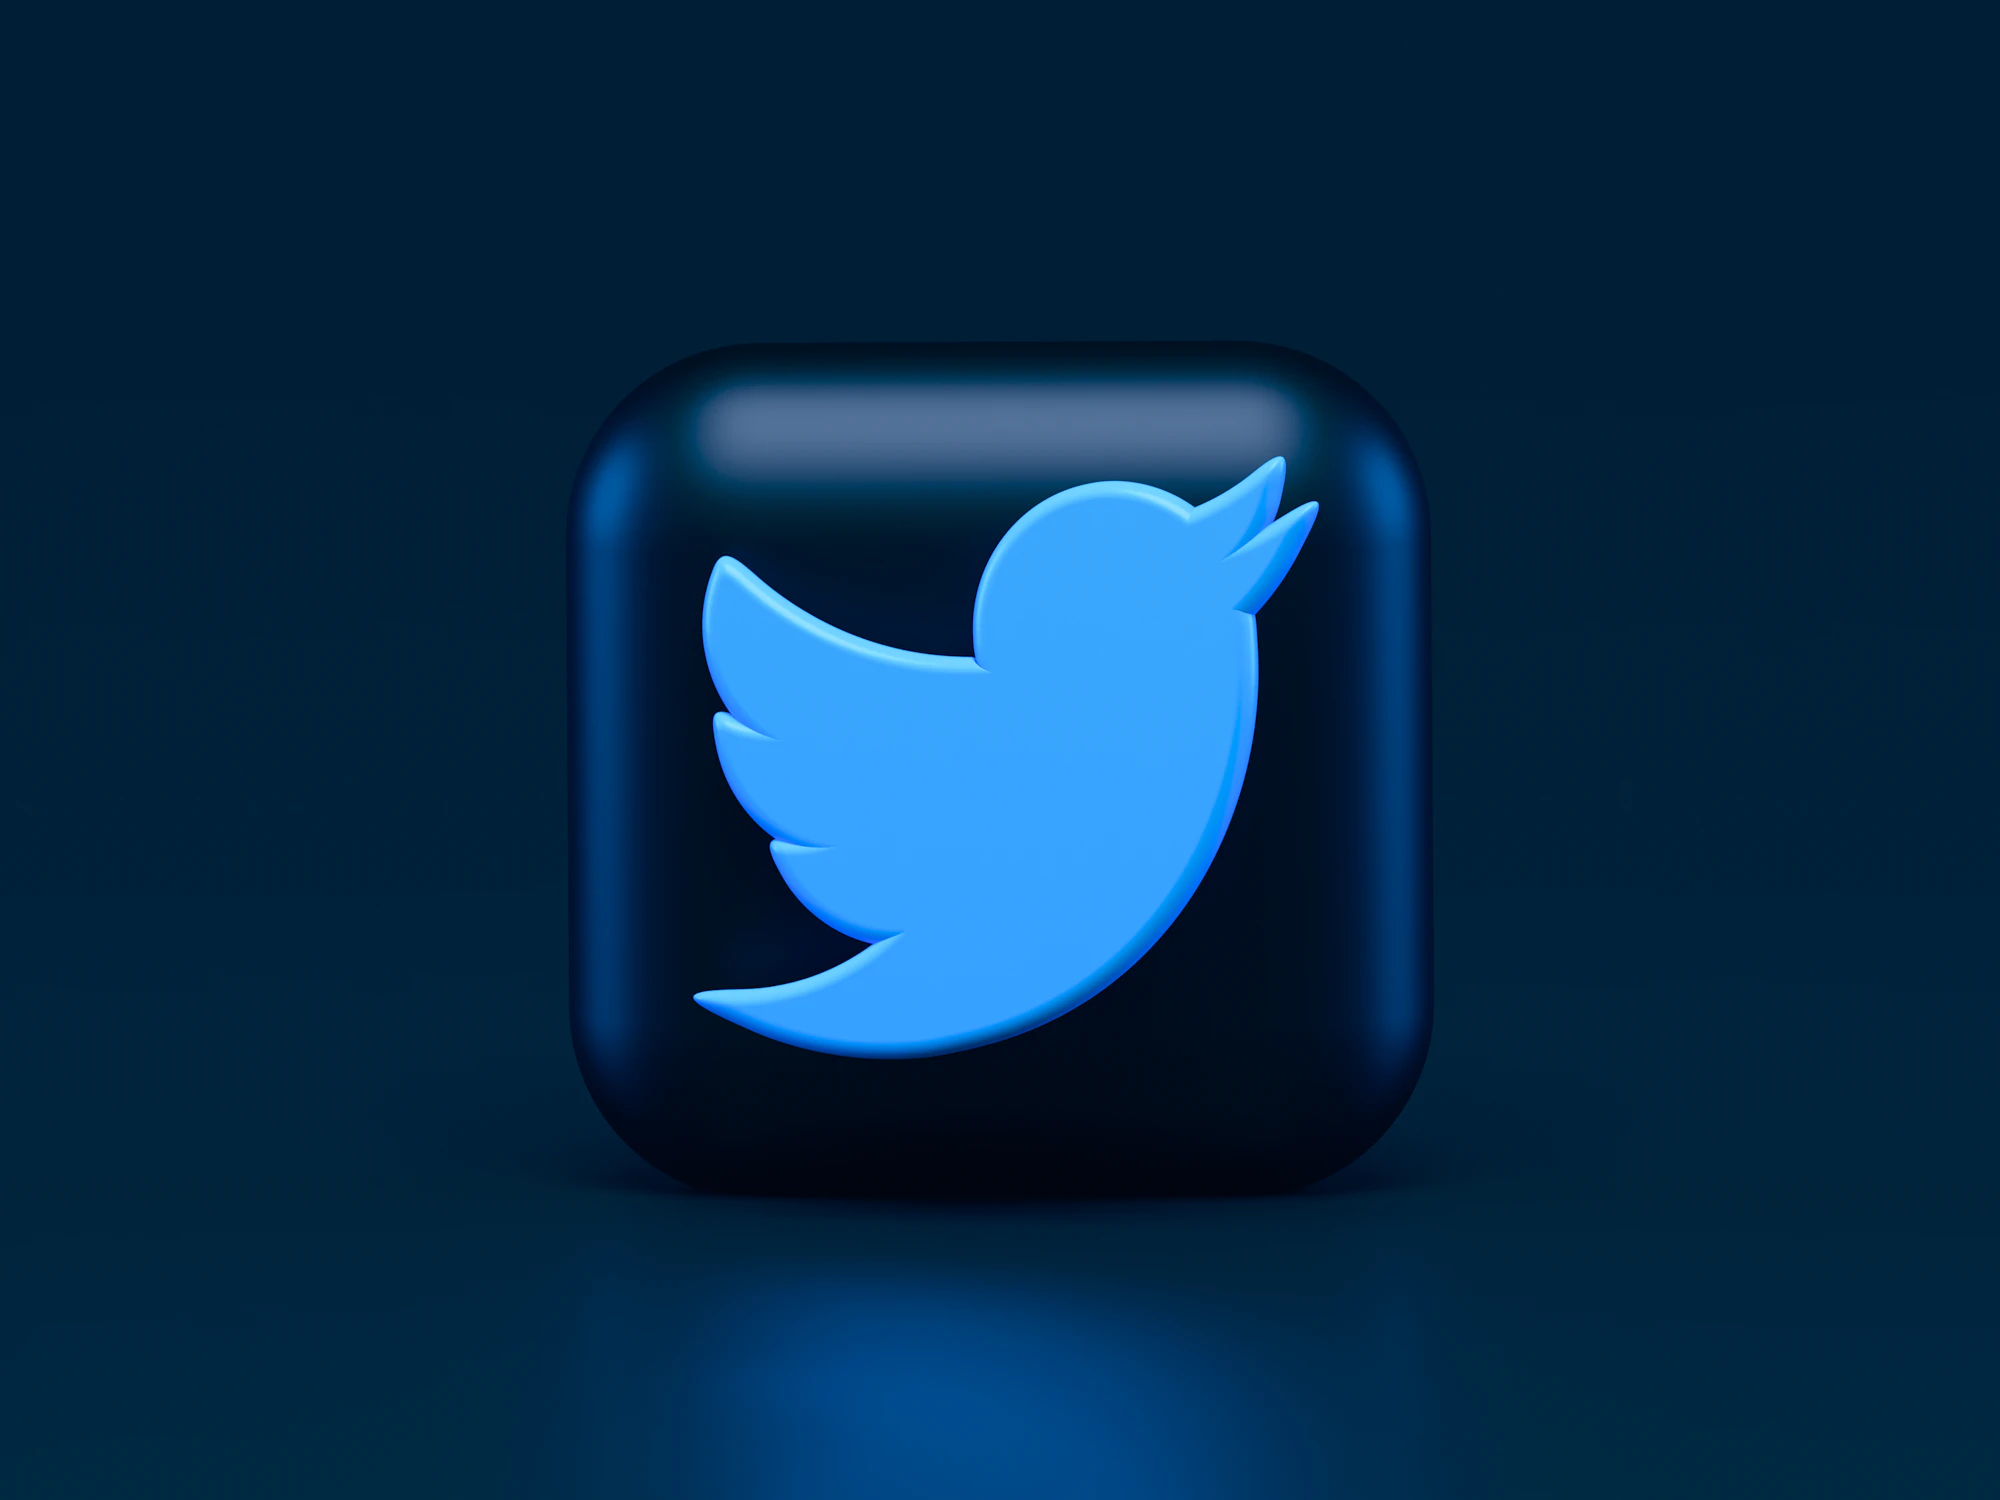 New IT regulations must be followed by Twitter and other social media companies in India